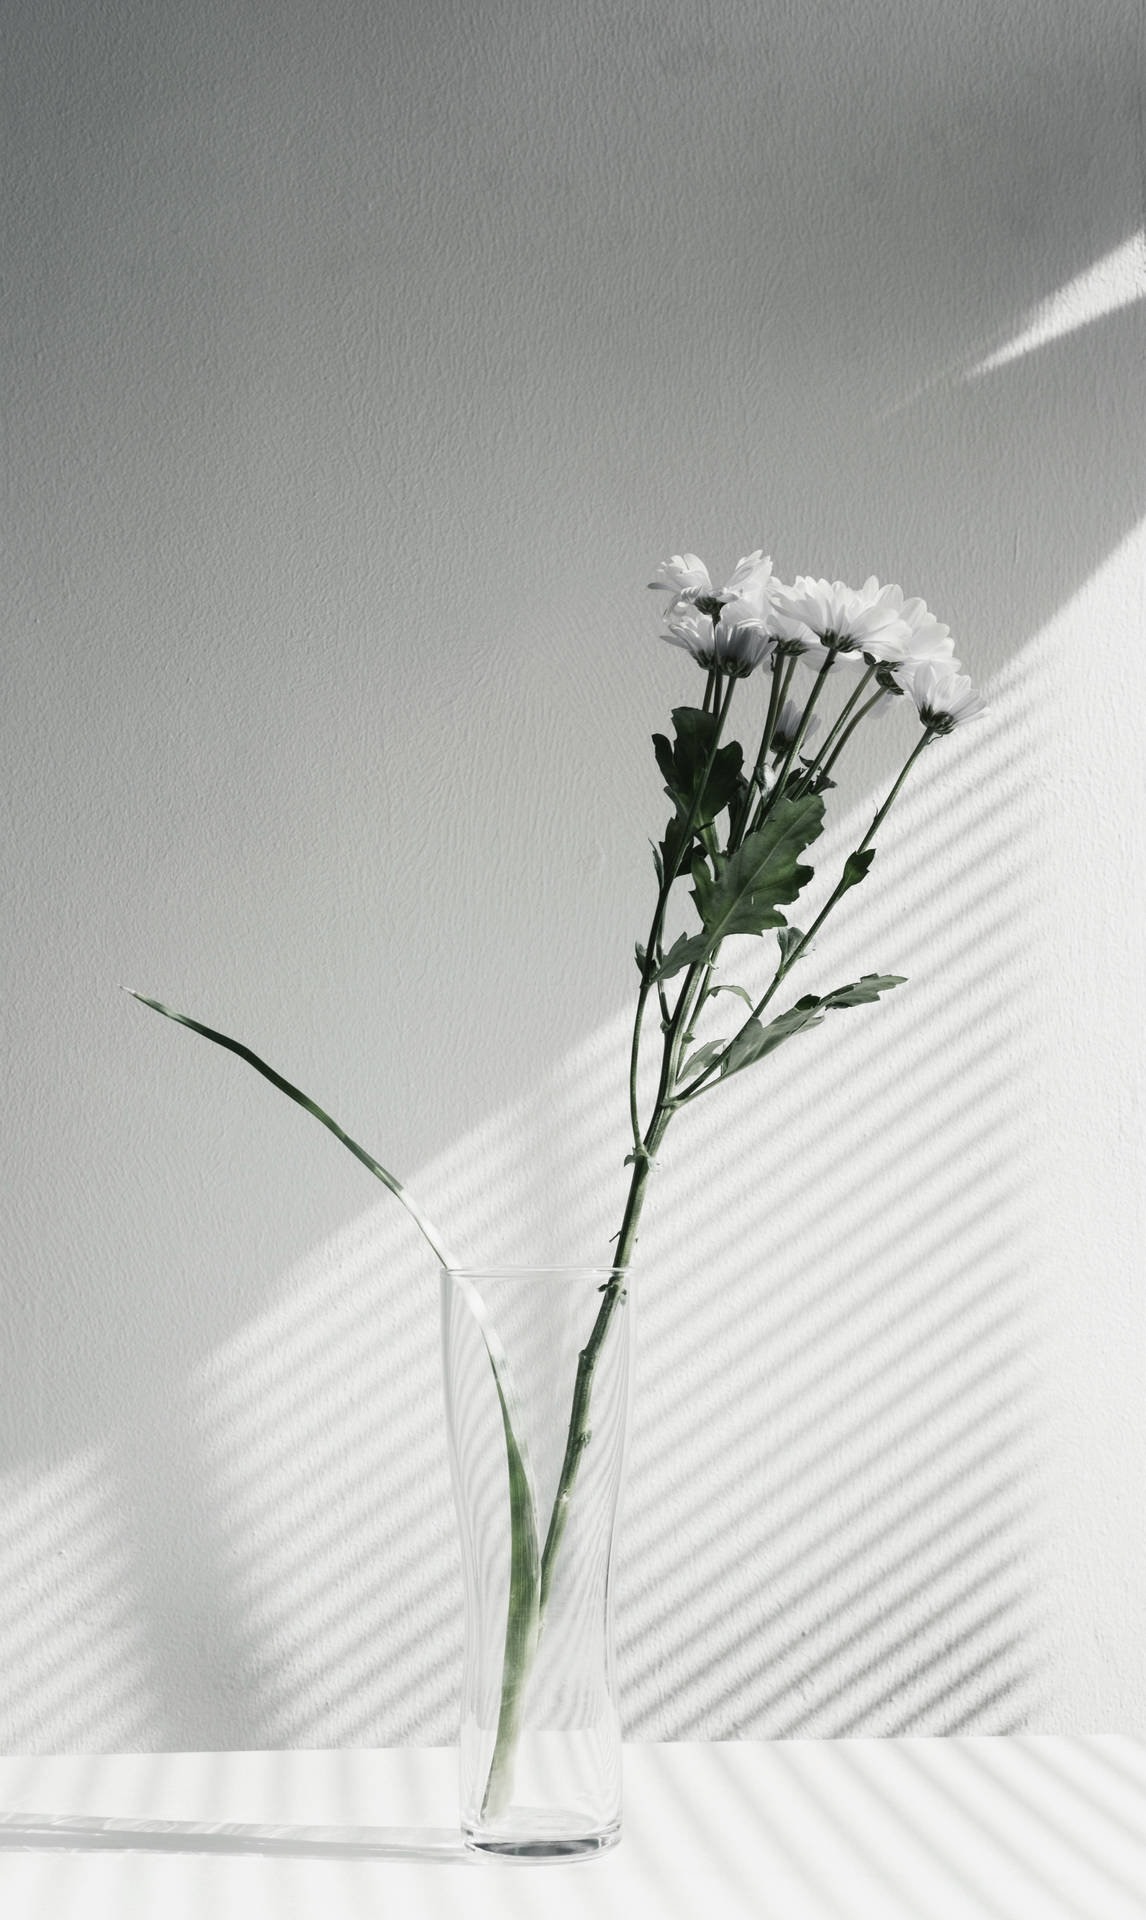 Aesthetic And Minimalist Flower Picture